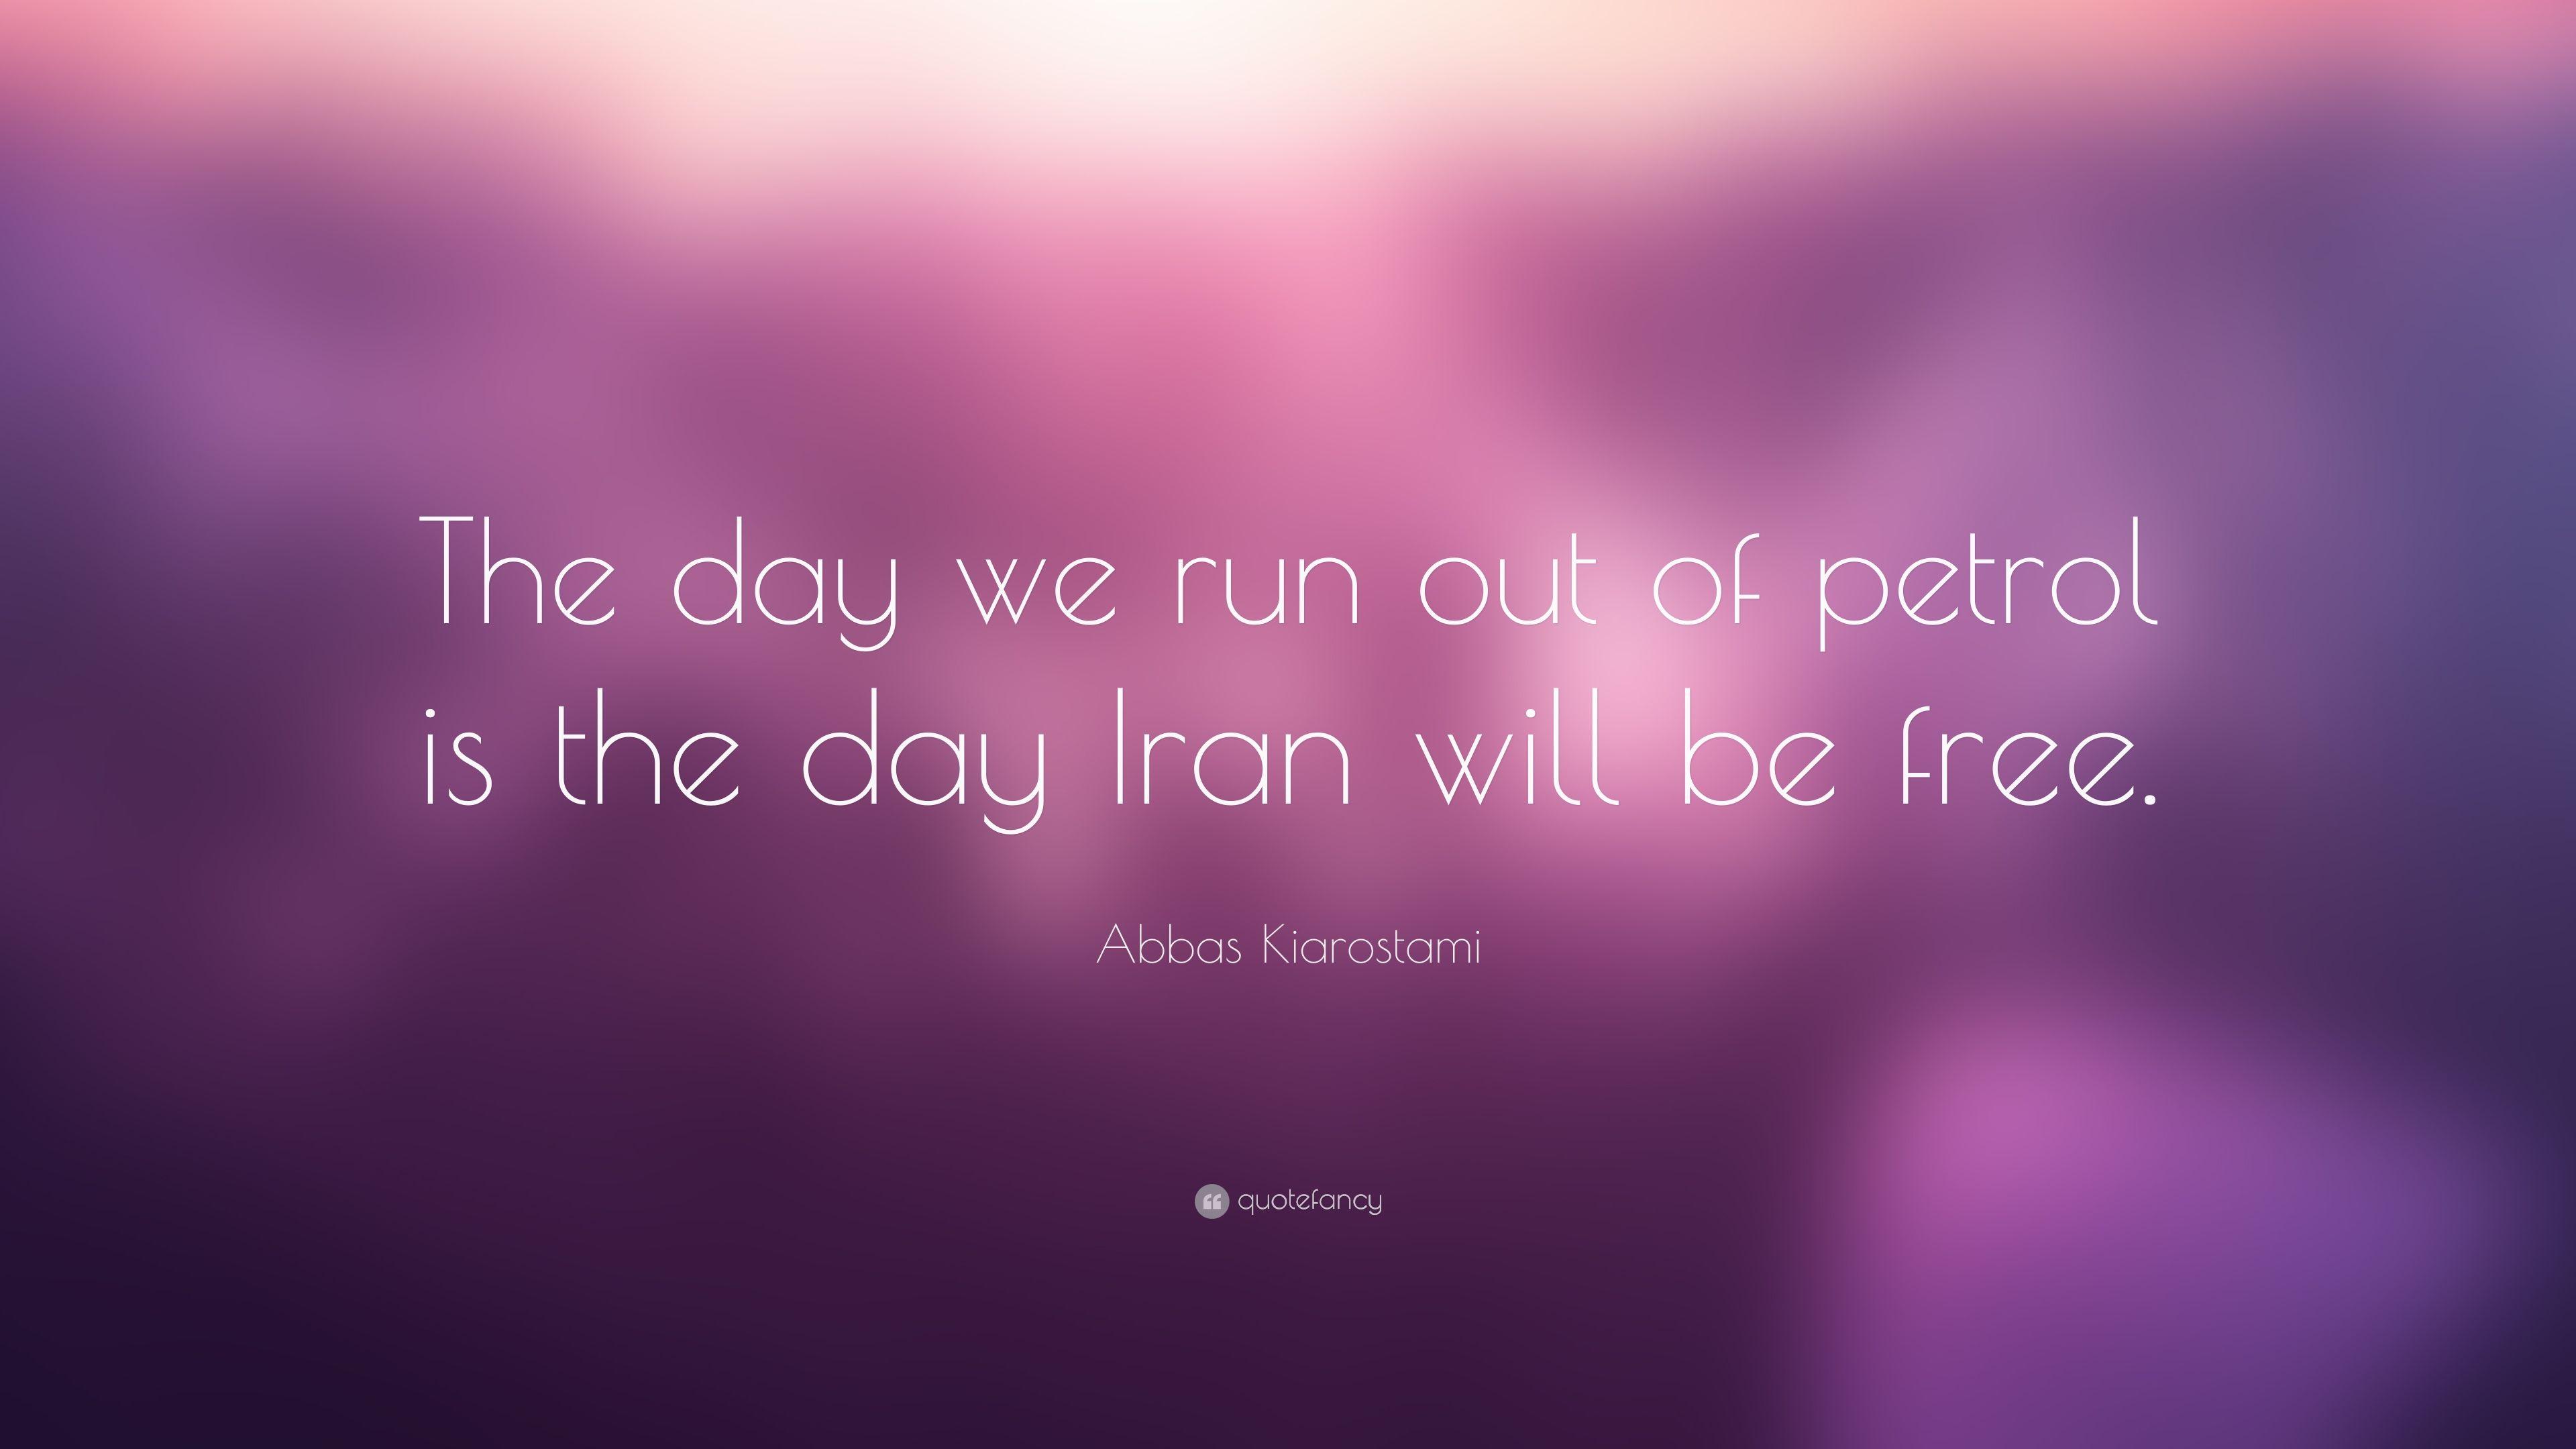 Abbas Kiarostami Quote: “The day we run out of petrol is the day